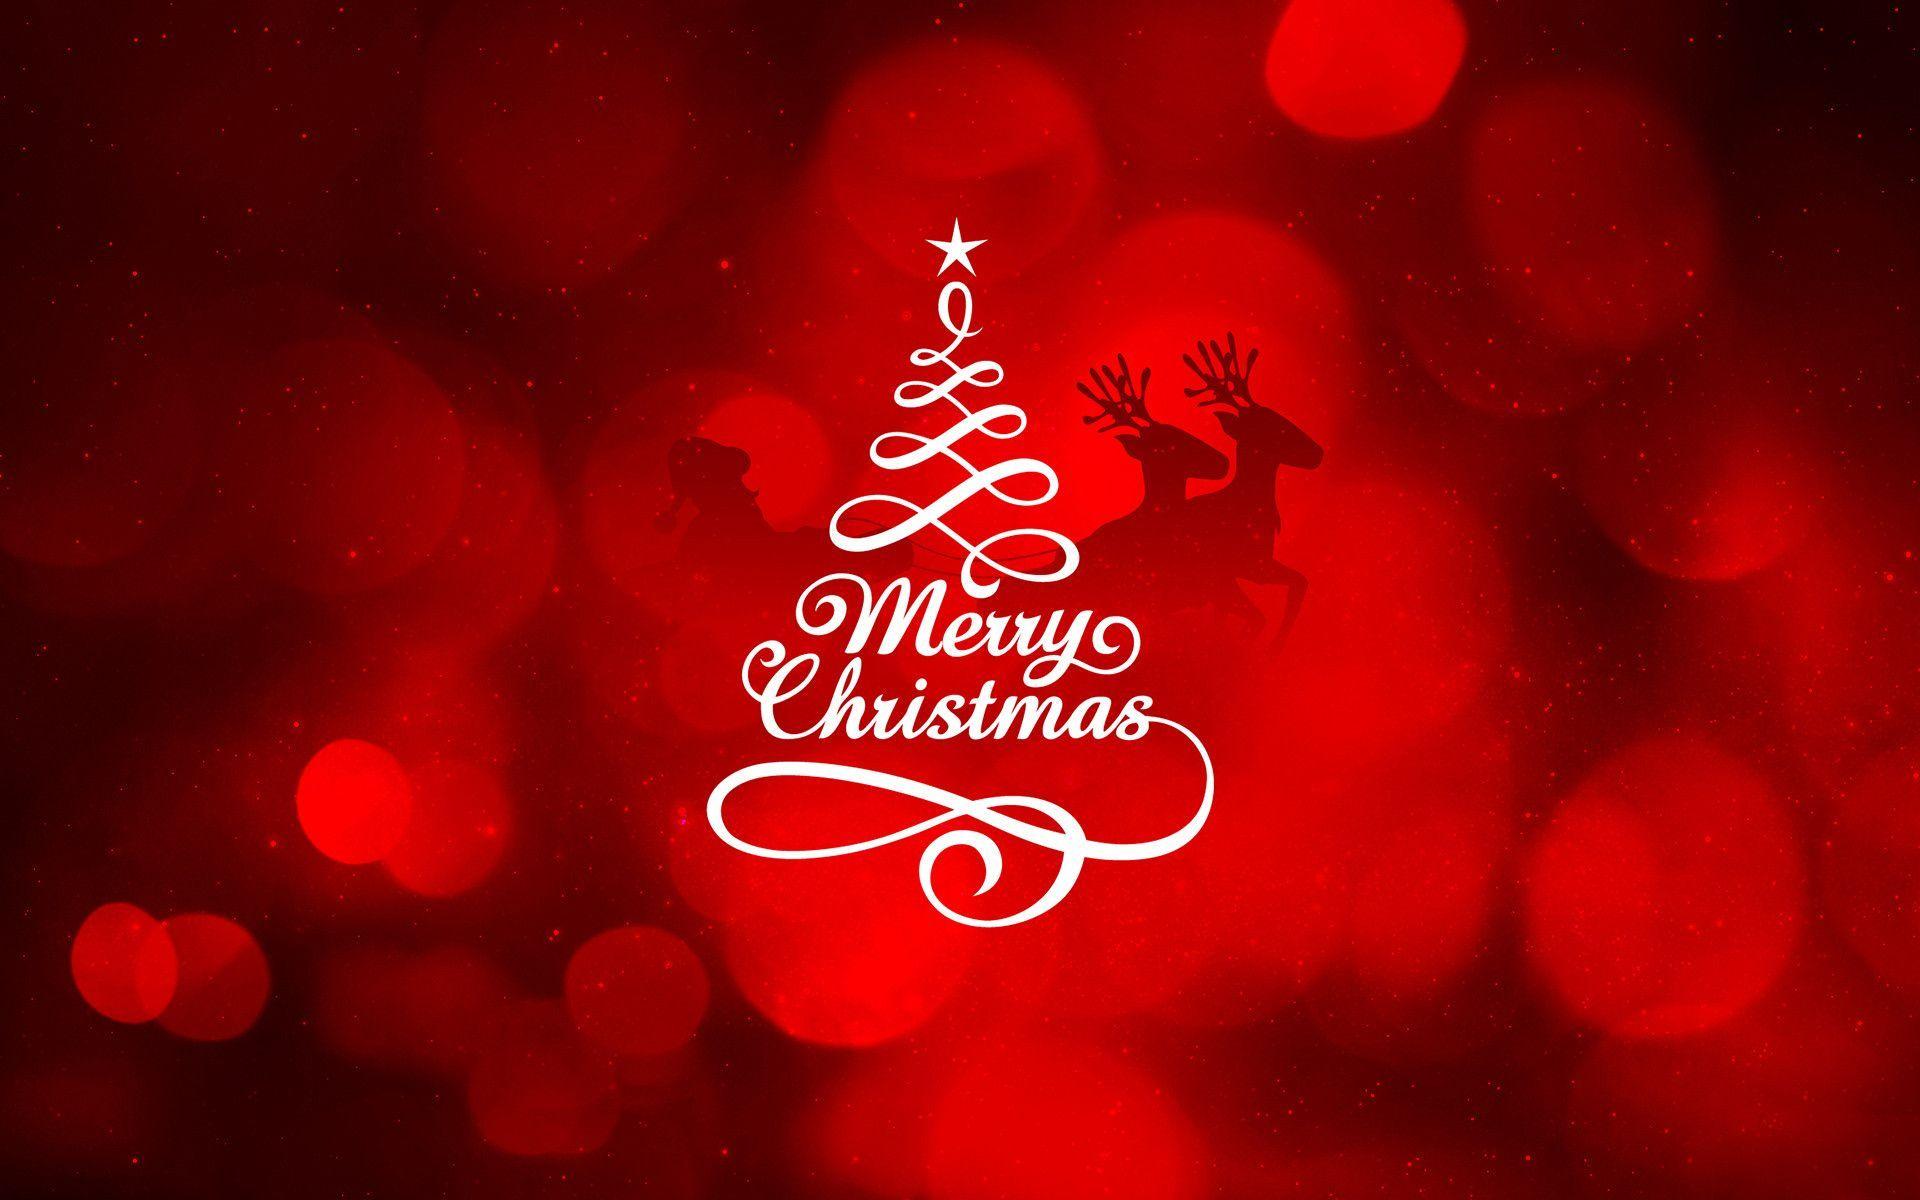 Merry Christmas 2016 Wallpapers - Wallpaper Cave